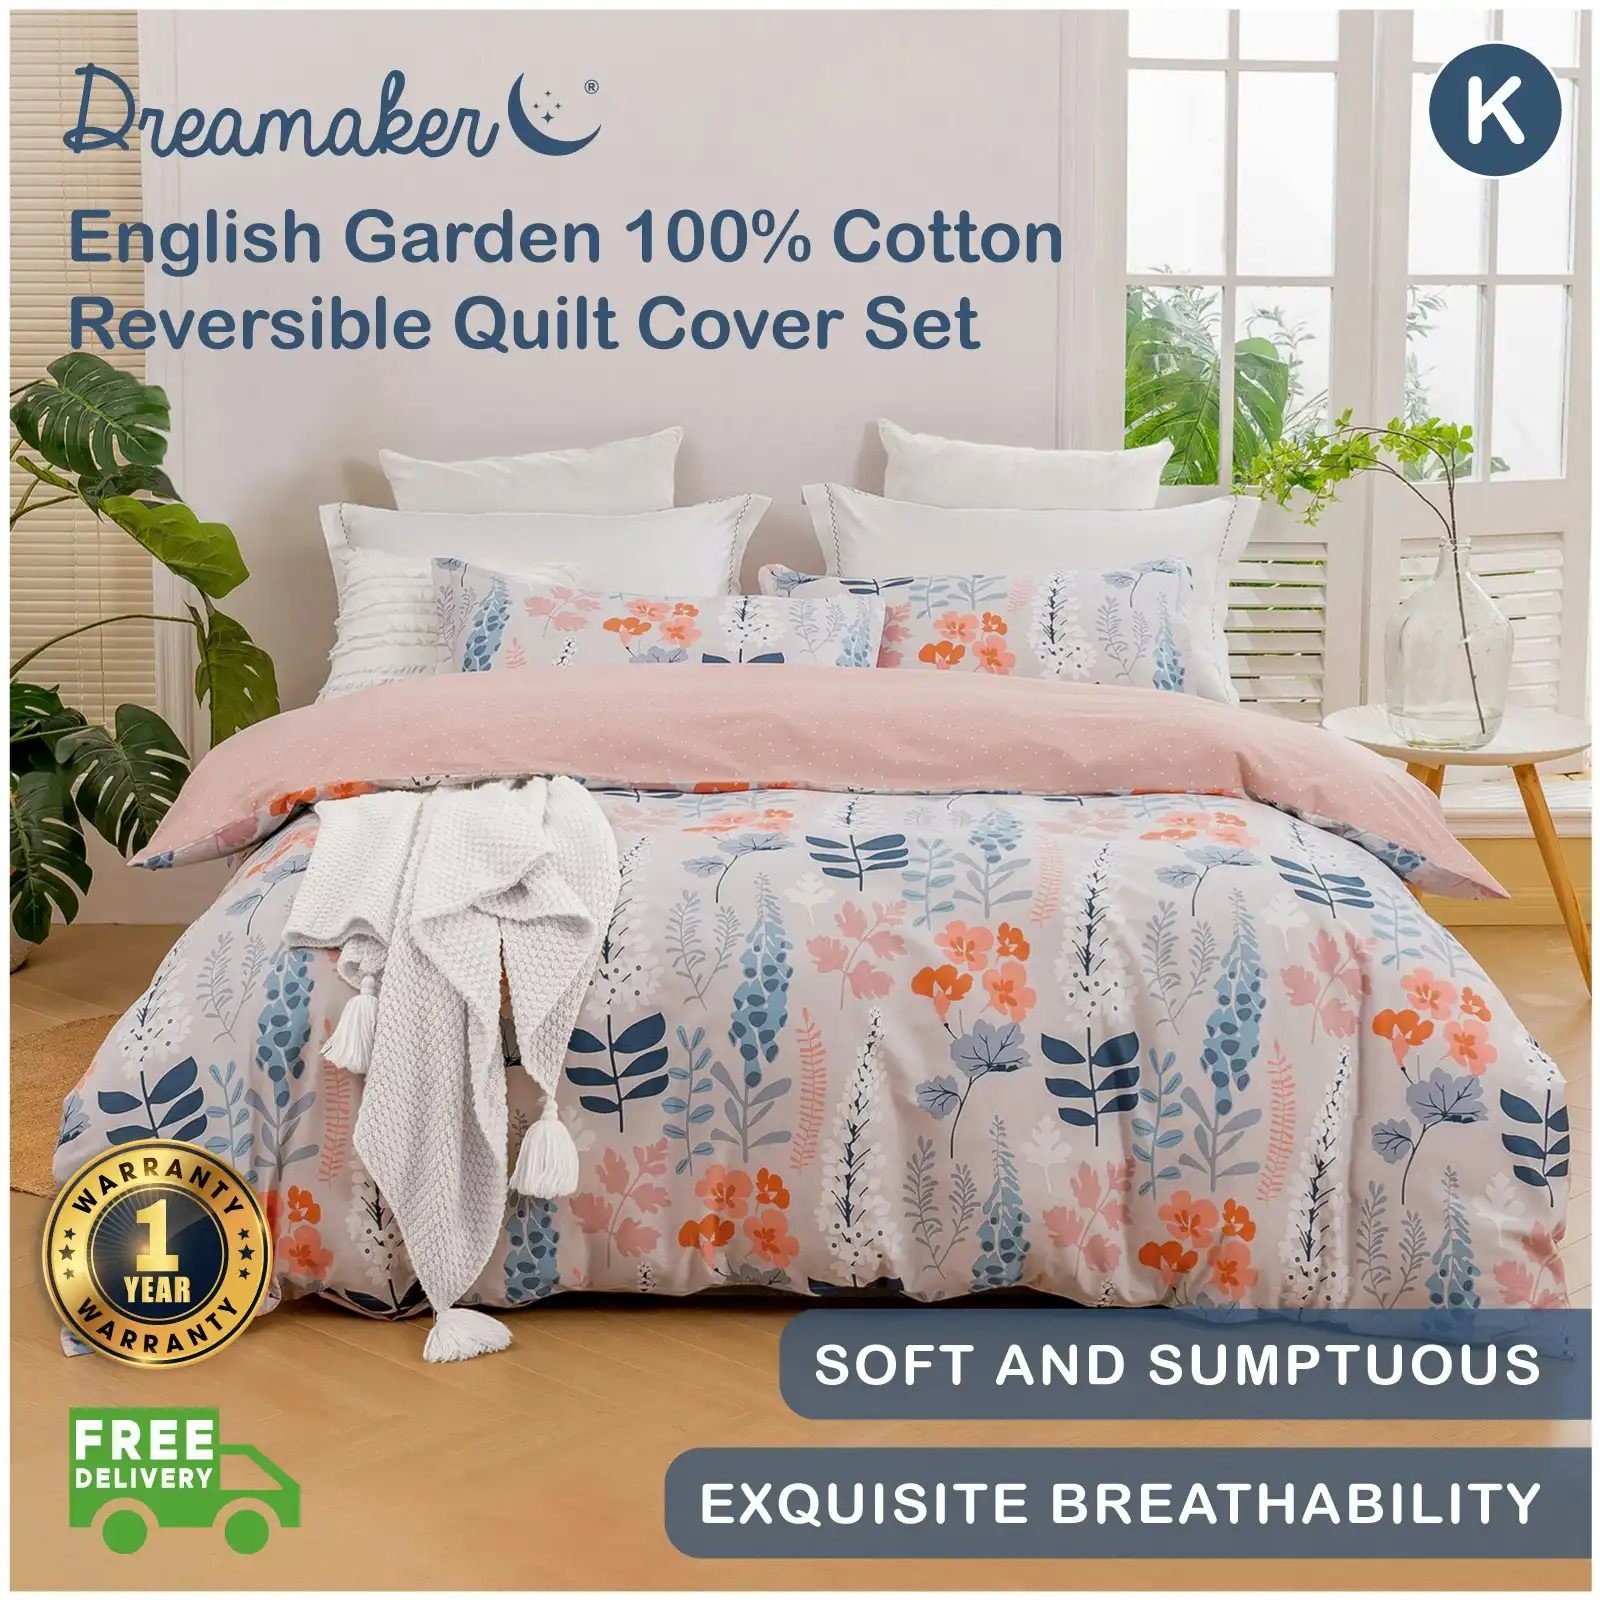 Dreamaker English Garden 100% Cotton Reversible Quilt Cover Set Pink King Bed